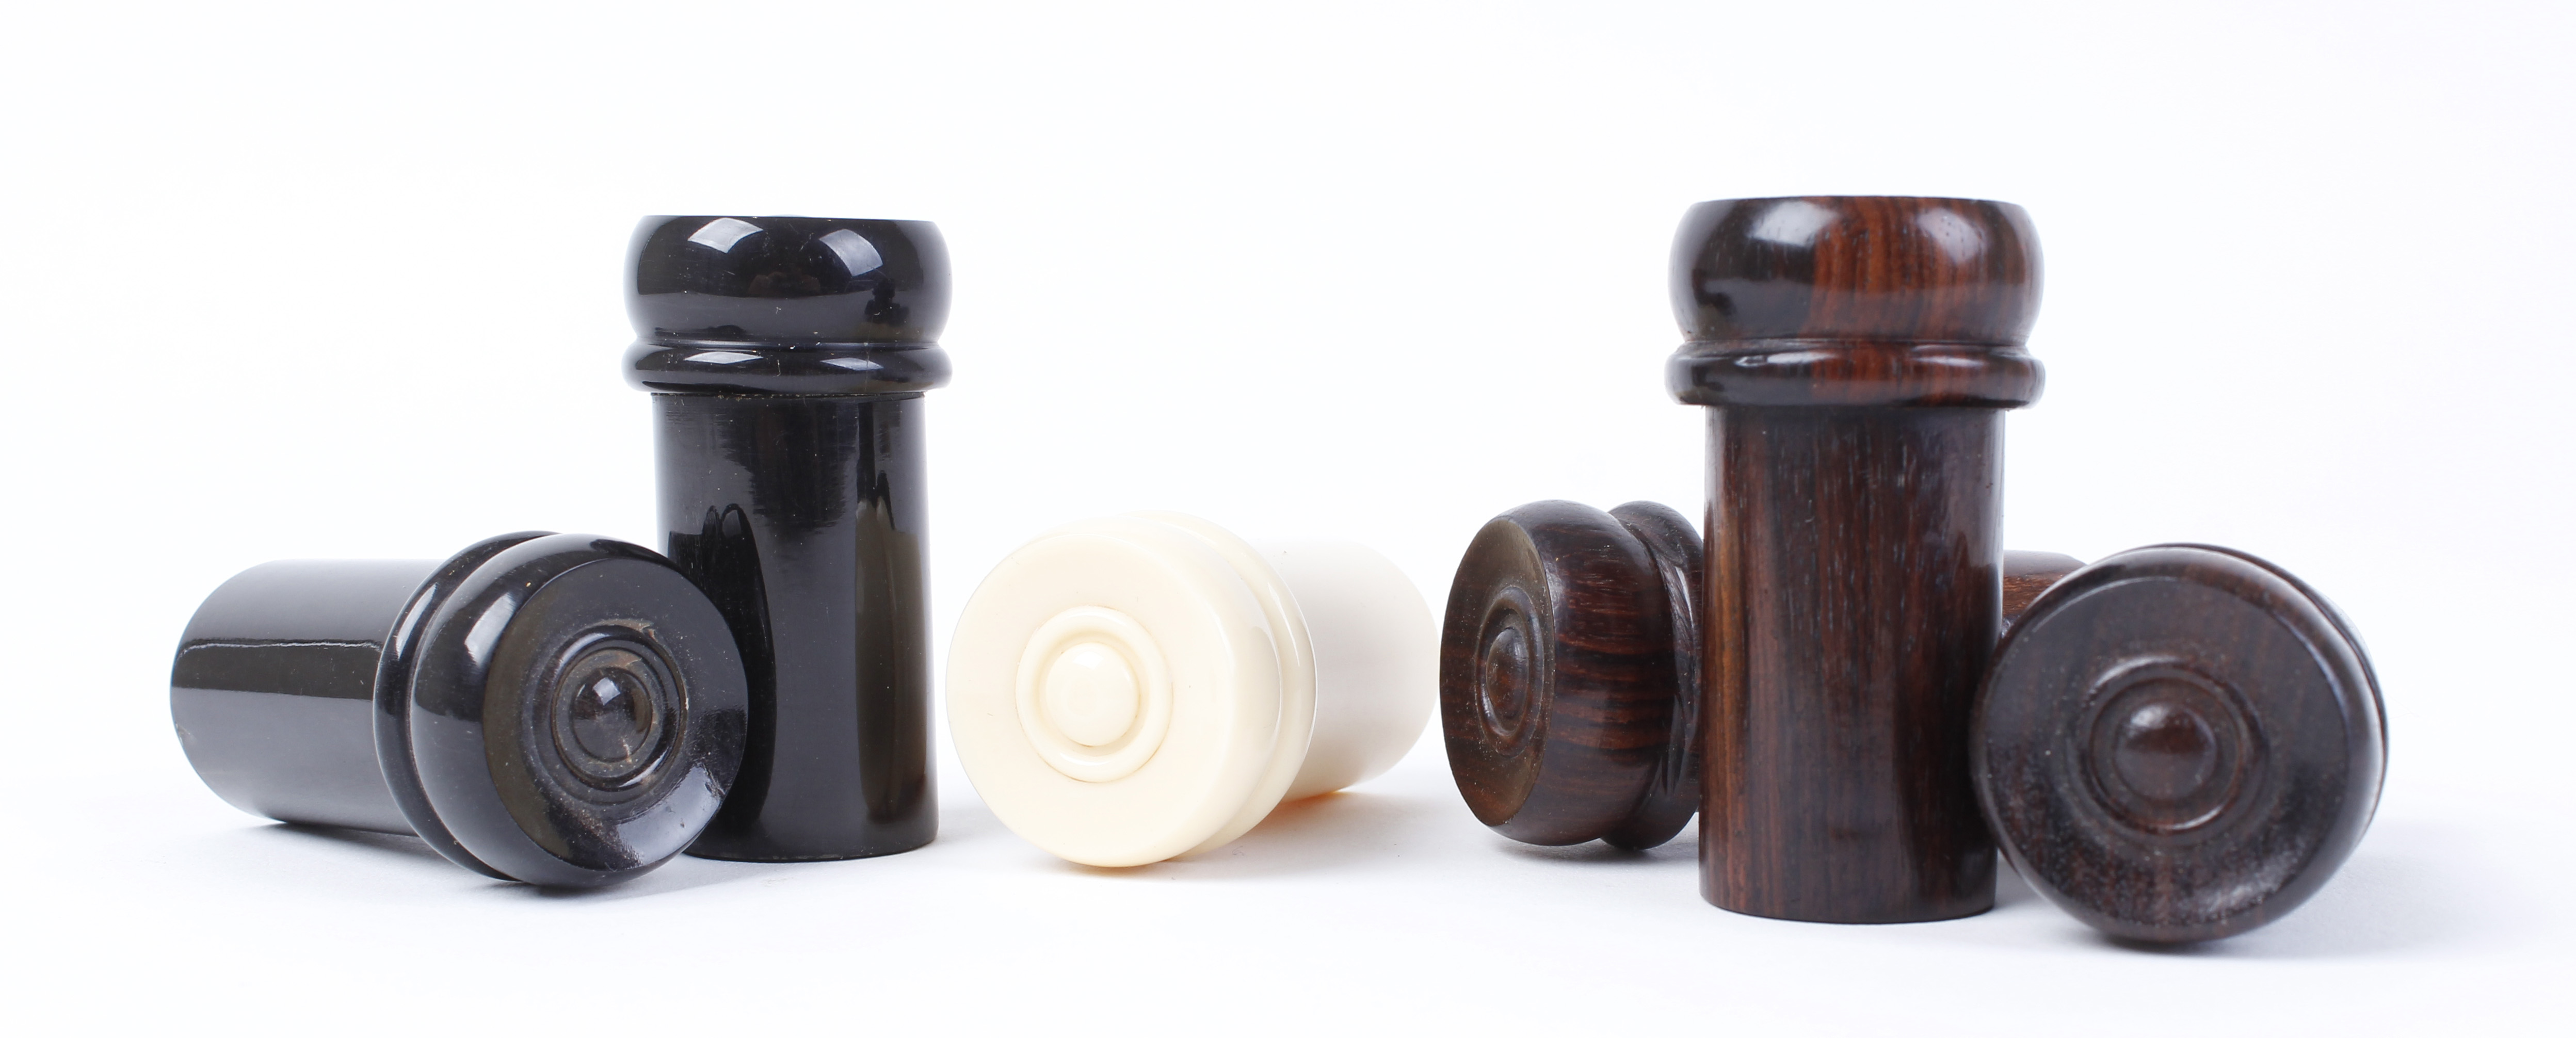 Six new striker pots in wood (3), horn (2), and bone (1), - Image 2 of 5